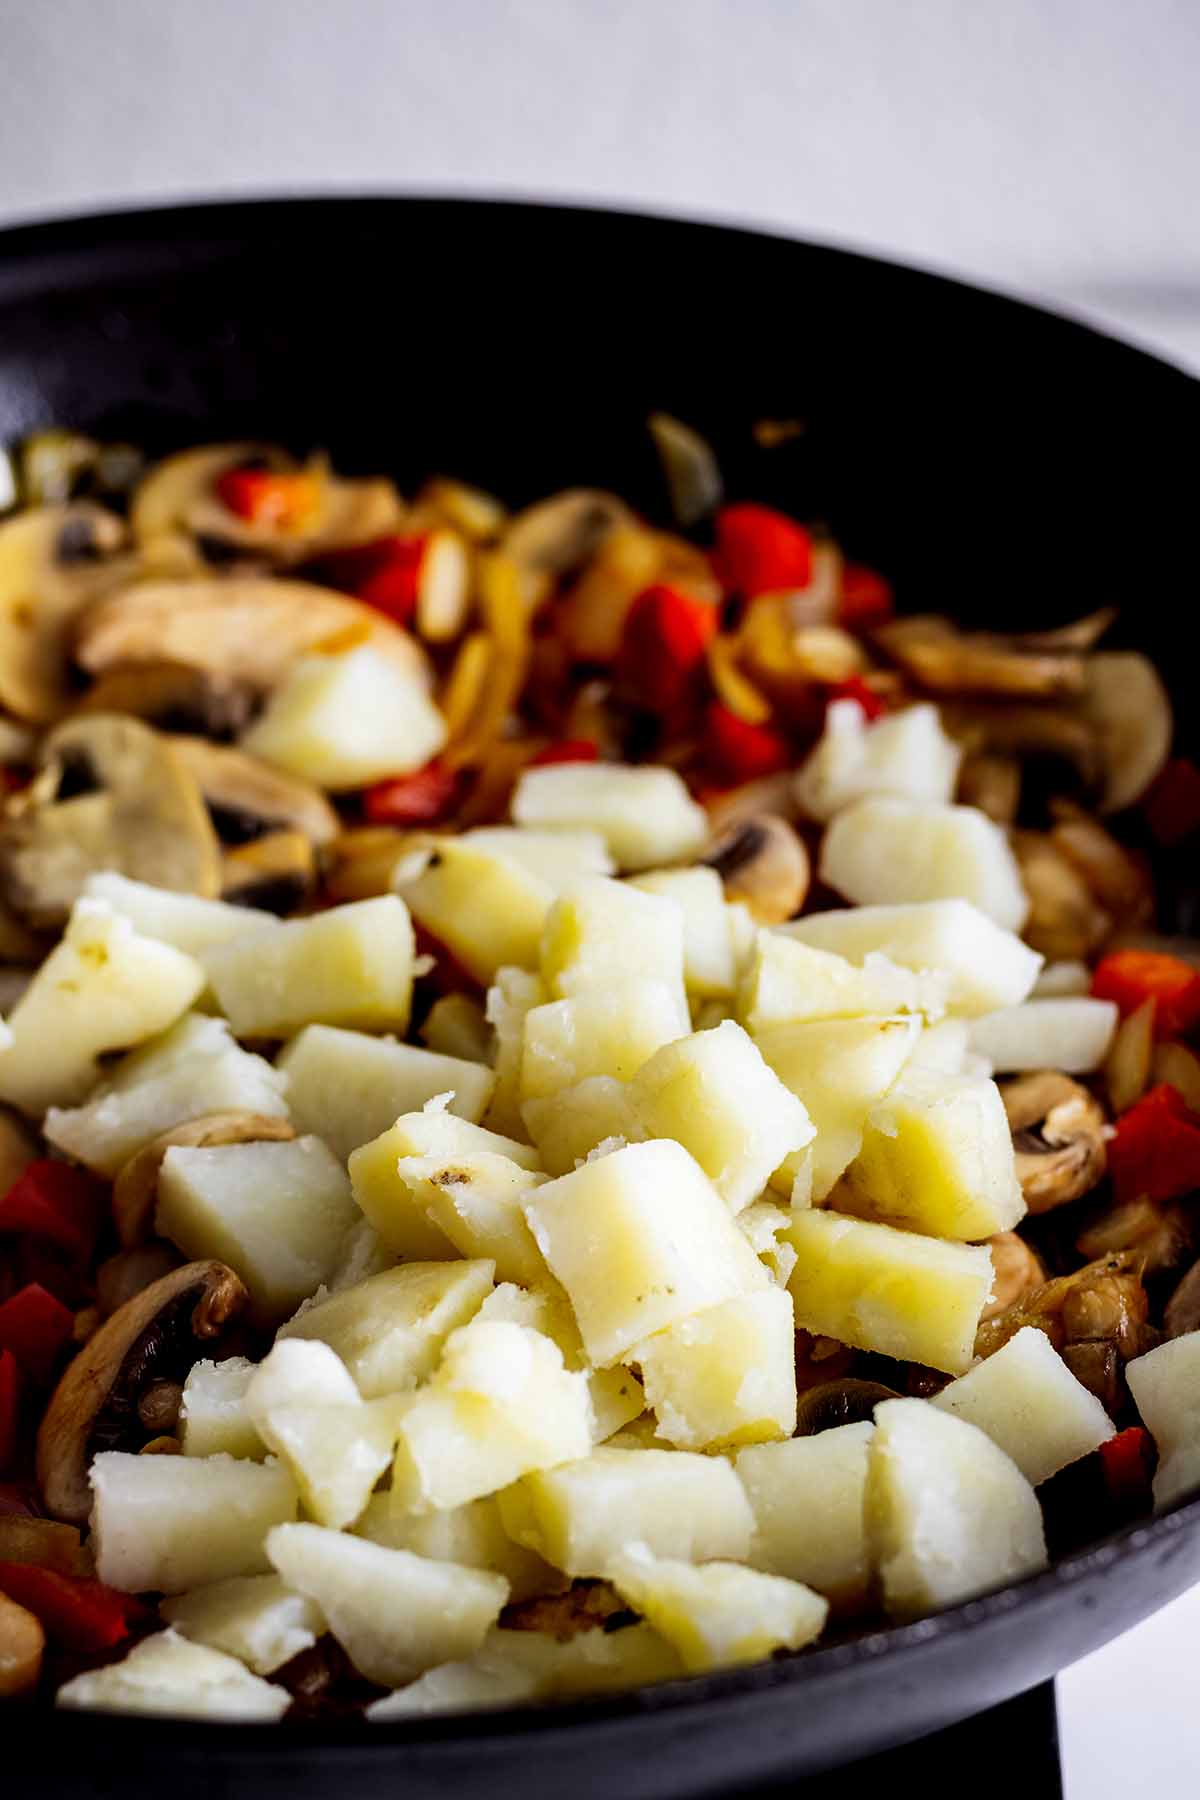 Potatoes cooking in a skillet with onions, mushrooms and red pepper.